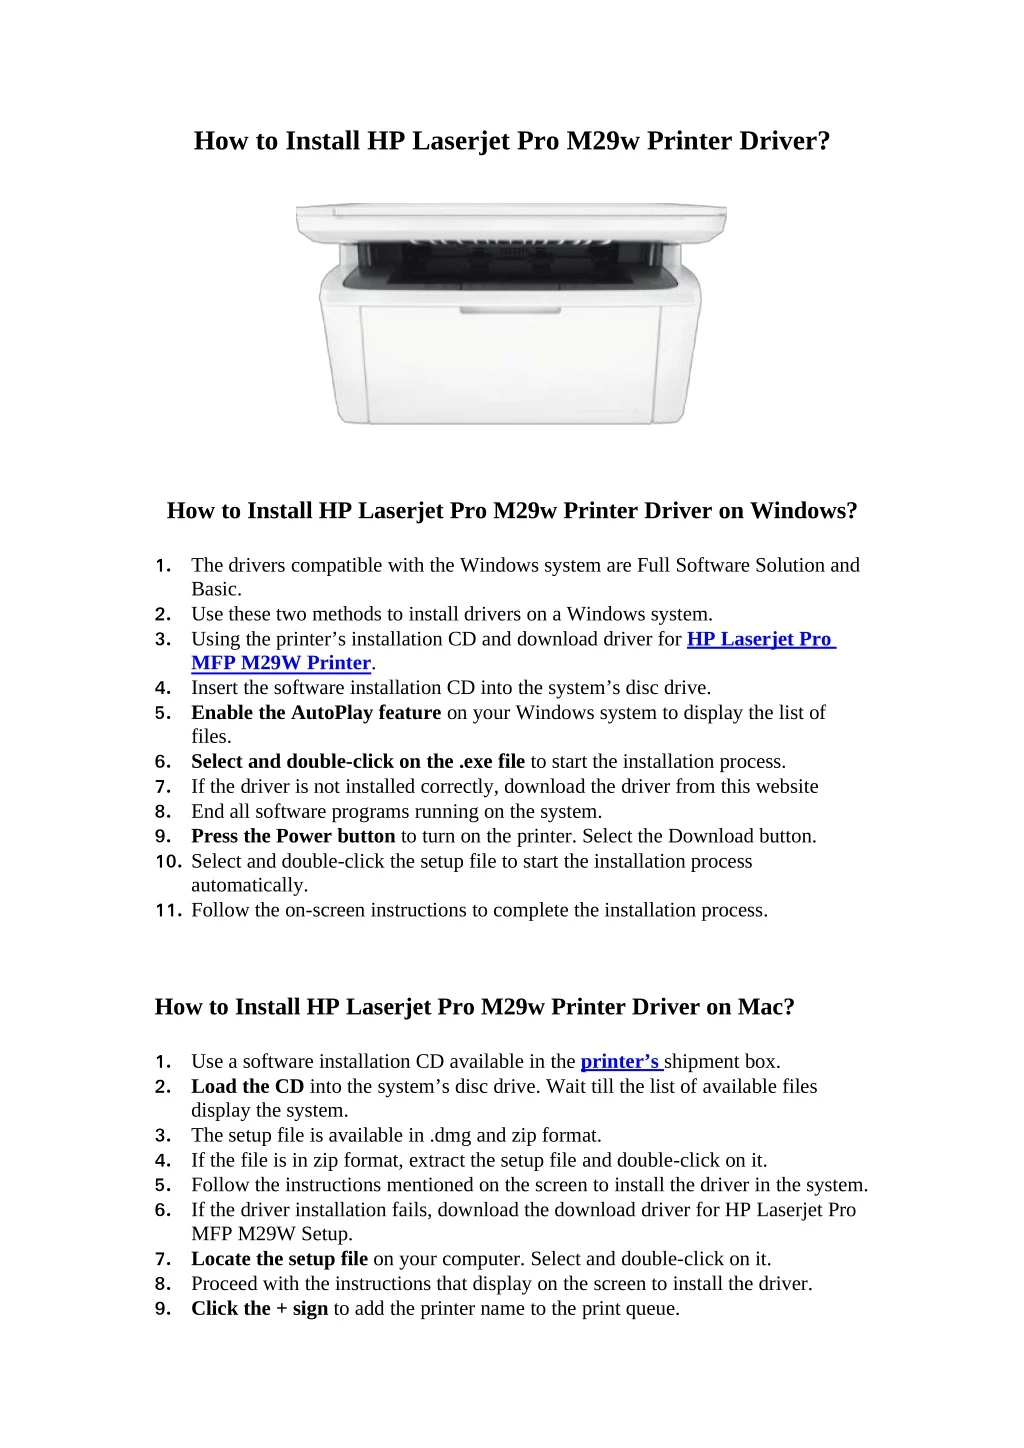 how to install hp laserjet pro m29w printer driver